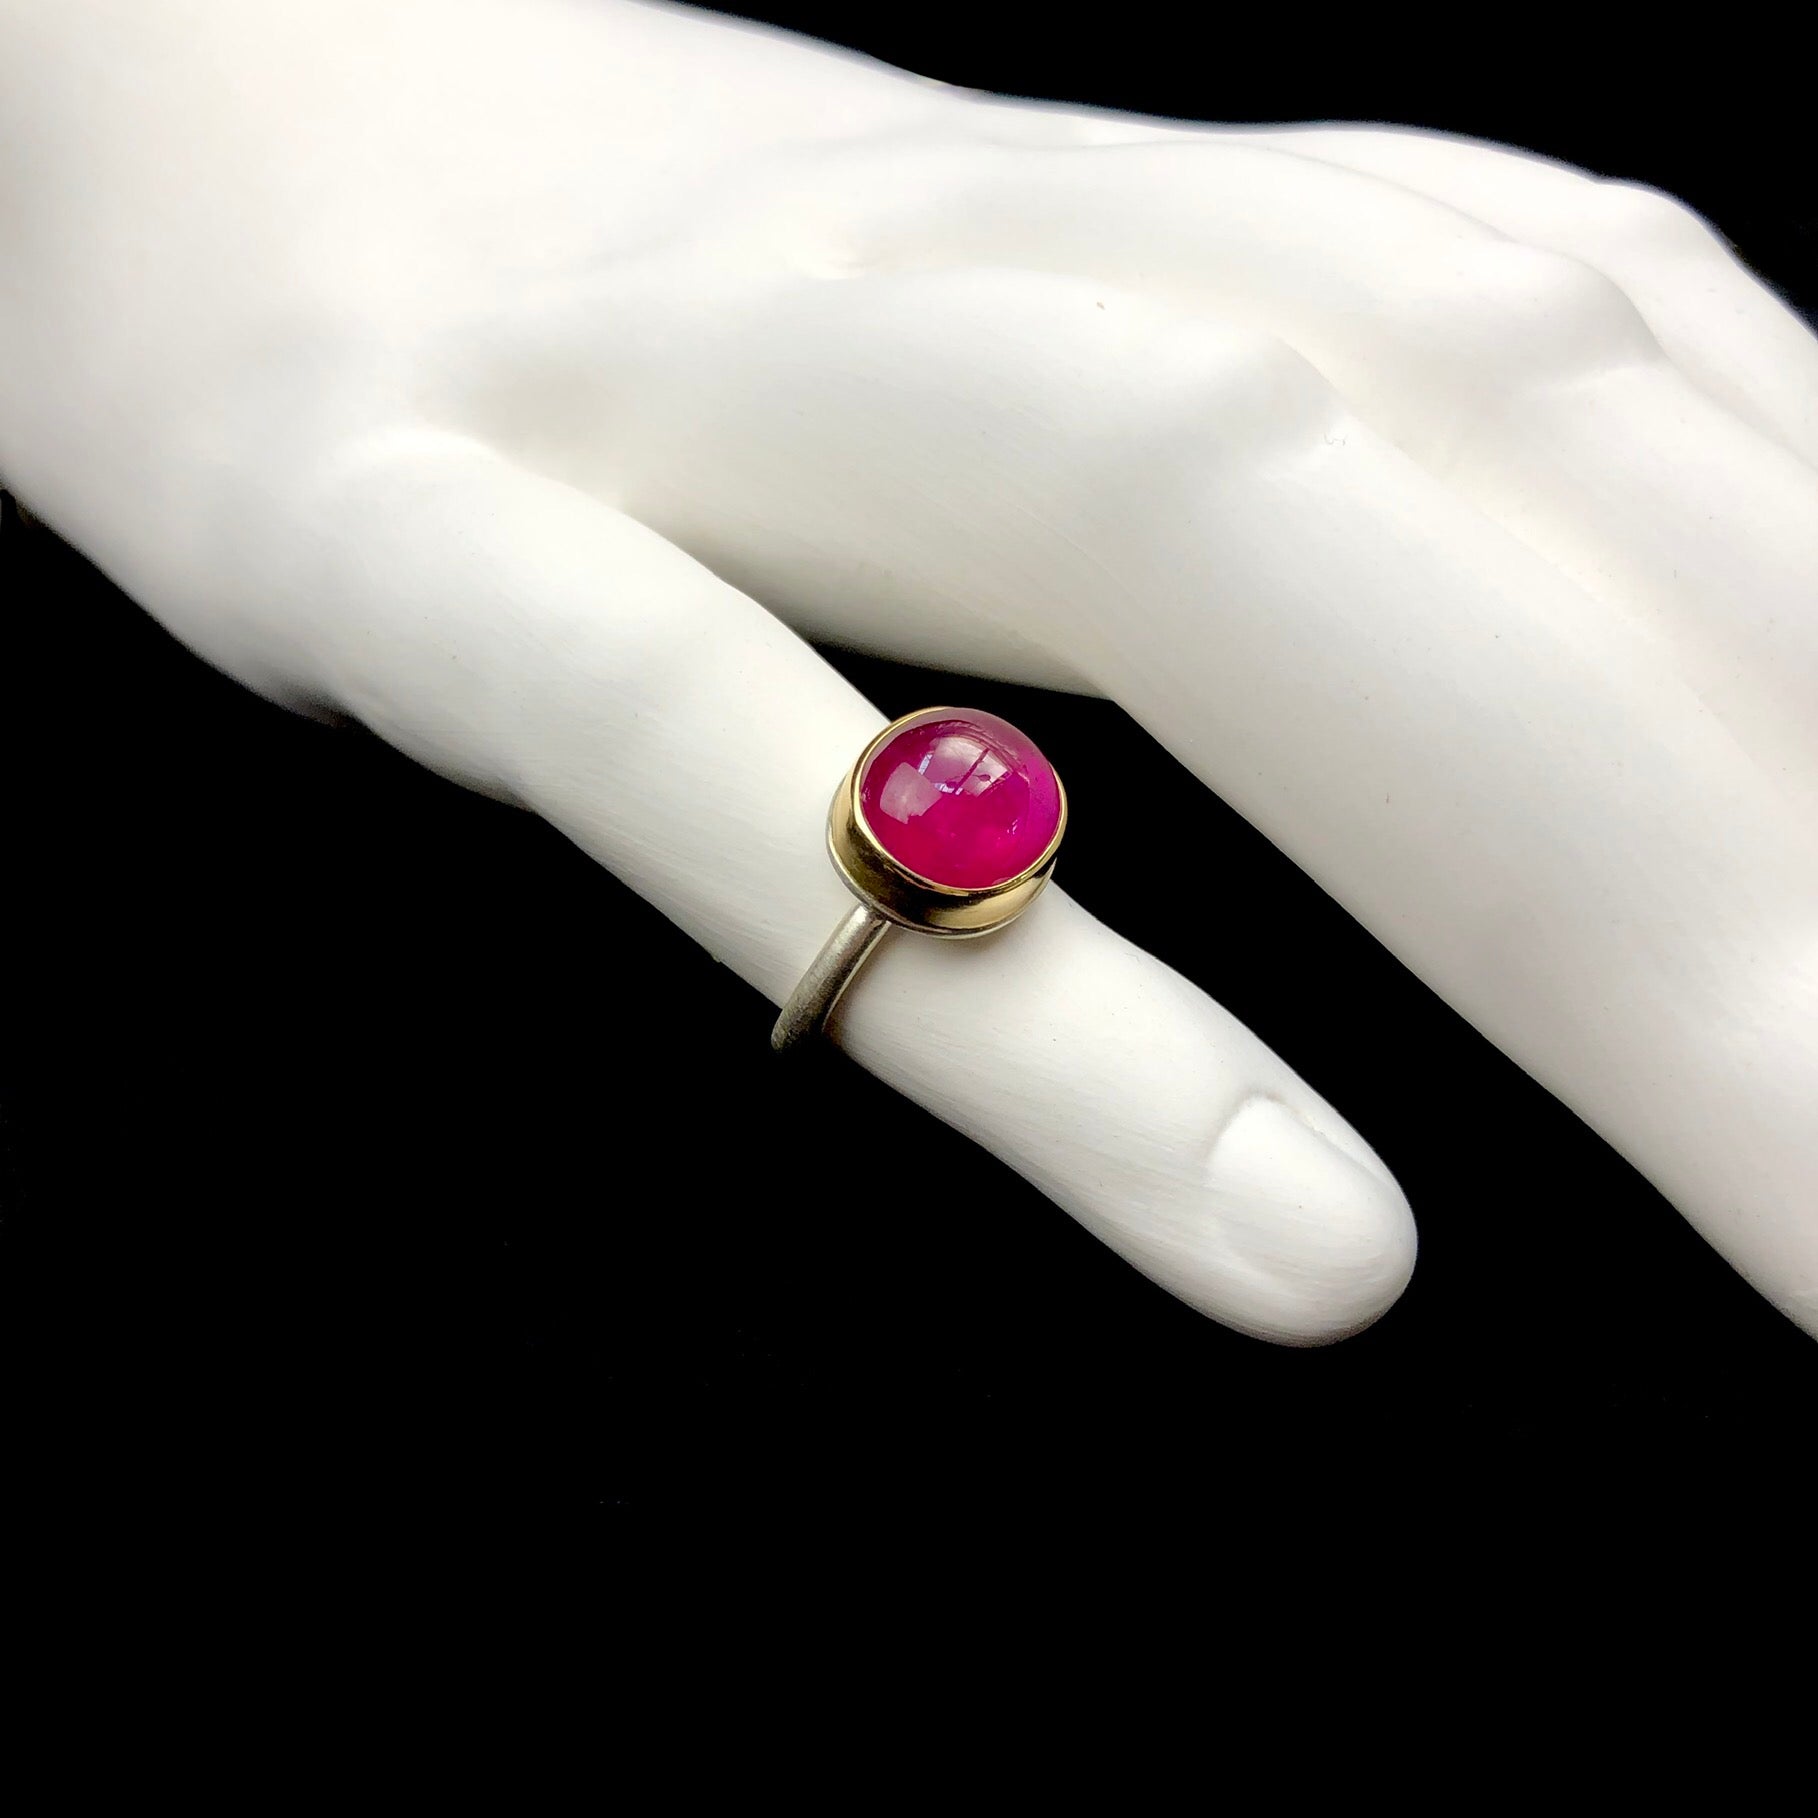 Side profile view of polished surface of pink ruby stone ring shown on white ceramic finger